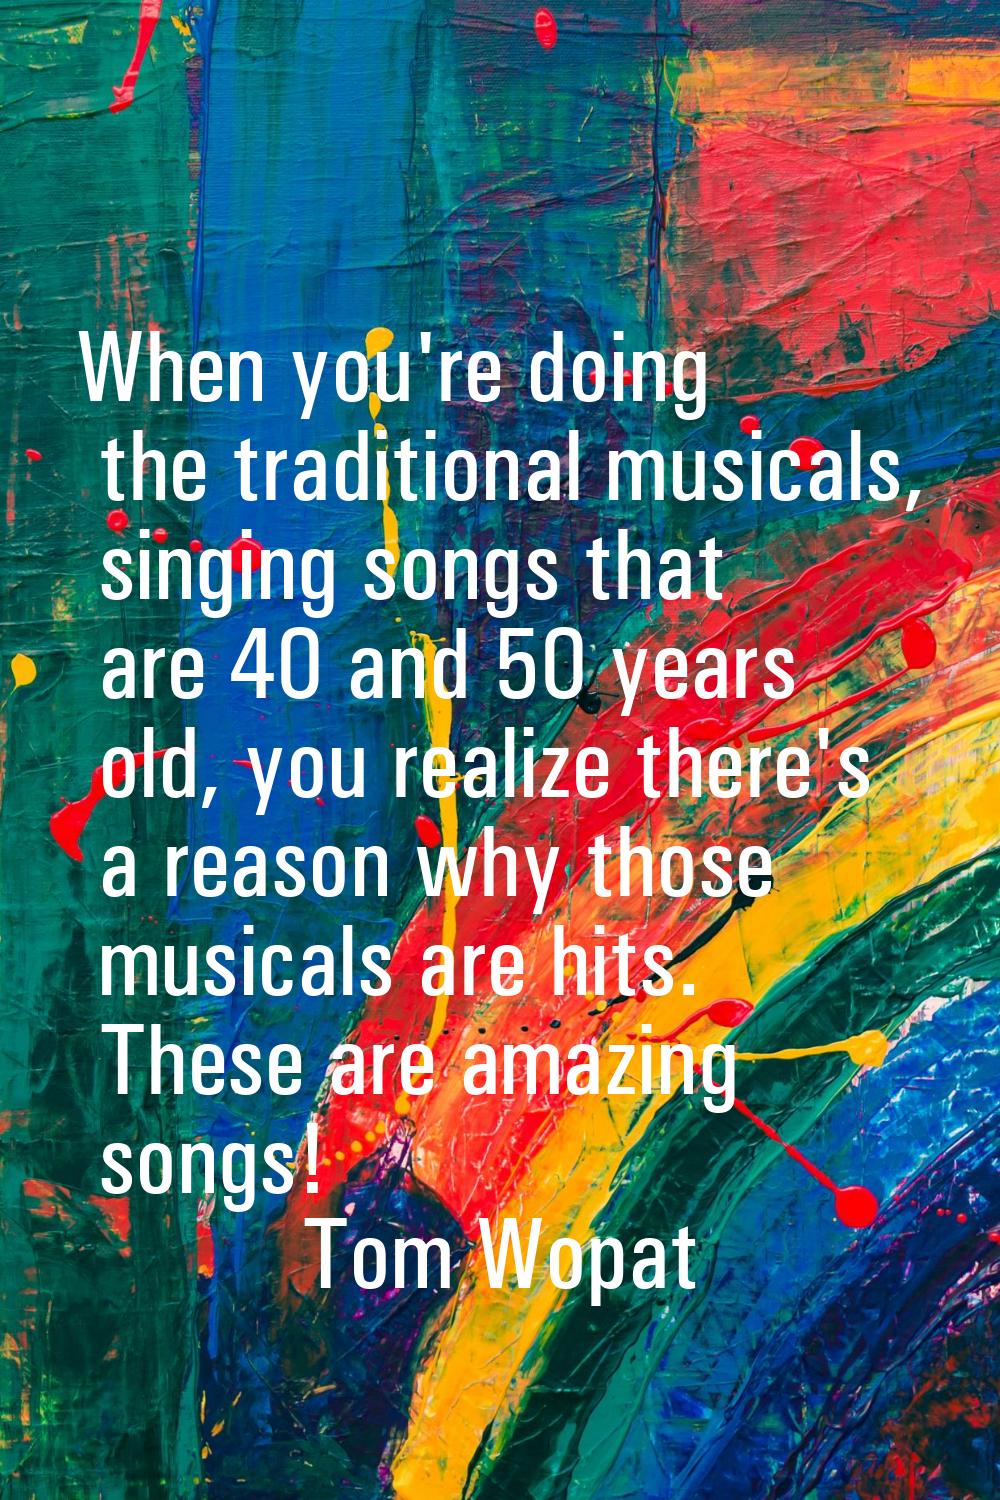 When you're doing the traditional musicals, singing songs that are 40 and 50 years old, you realize